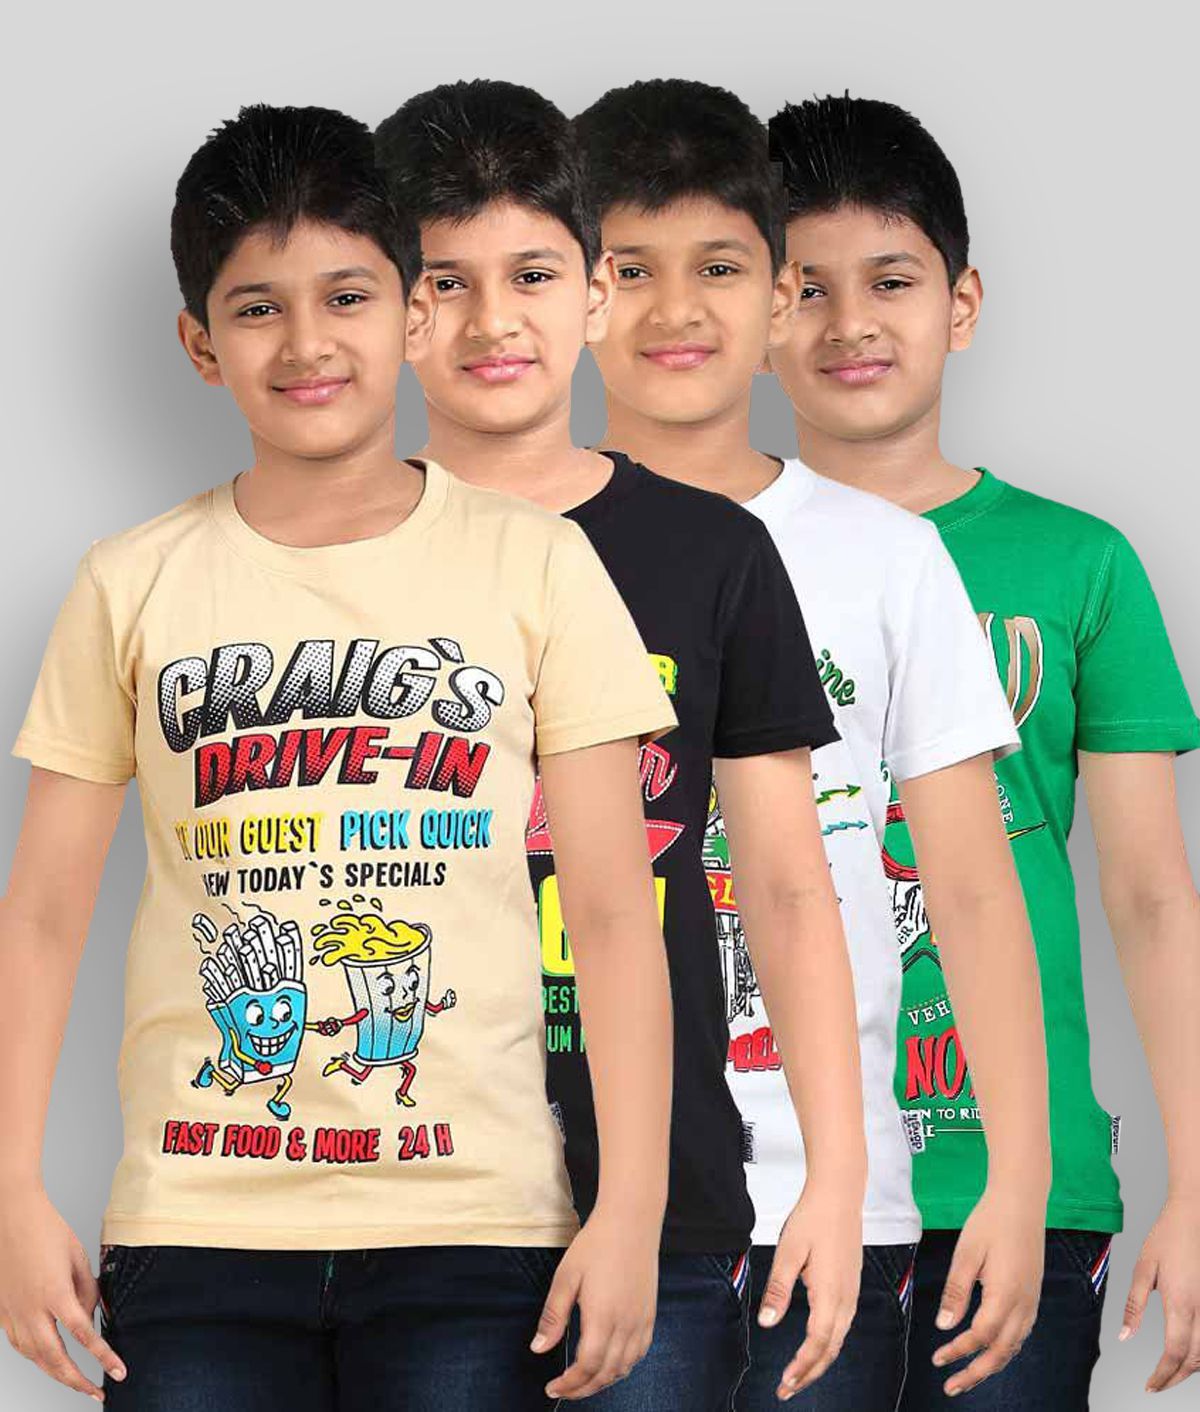 Dongli - Multicolor Cotton Boy's T-Shirt ( Pack of 4 )